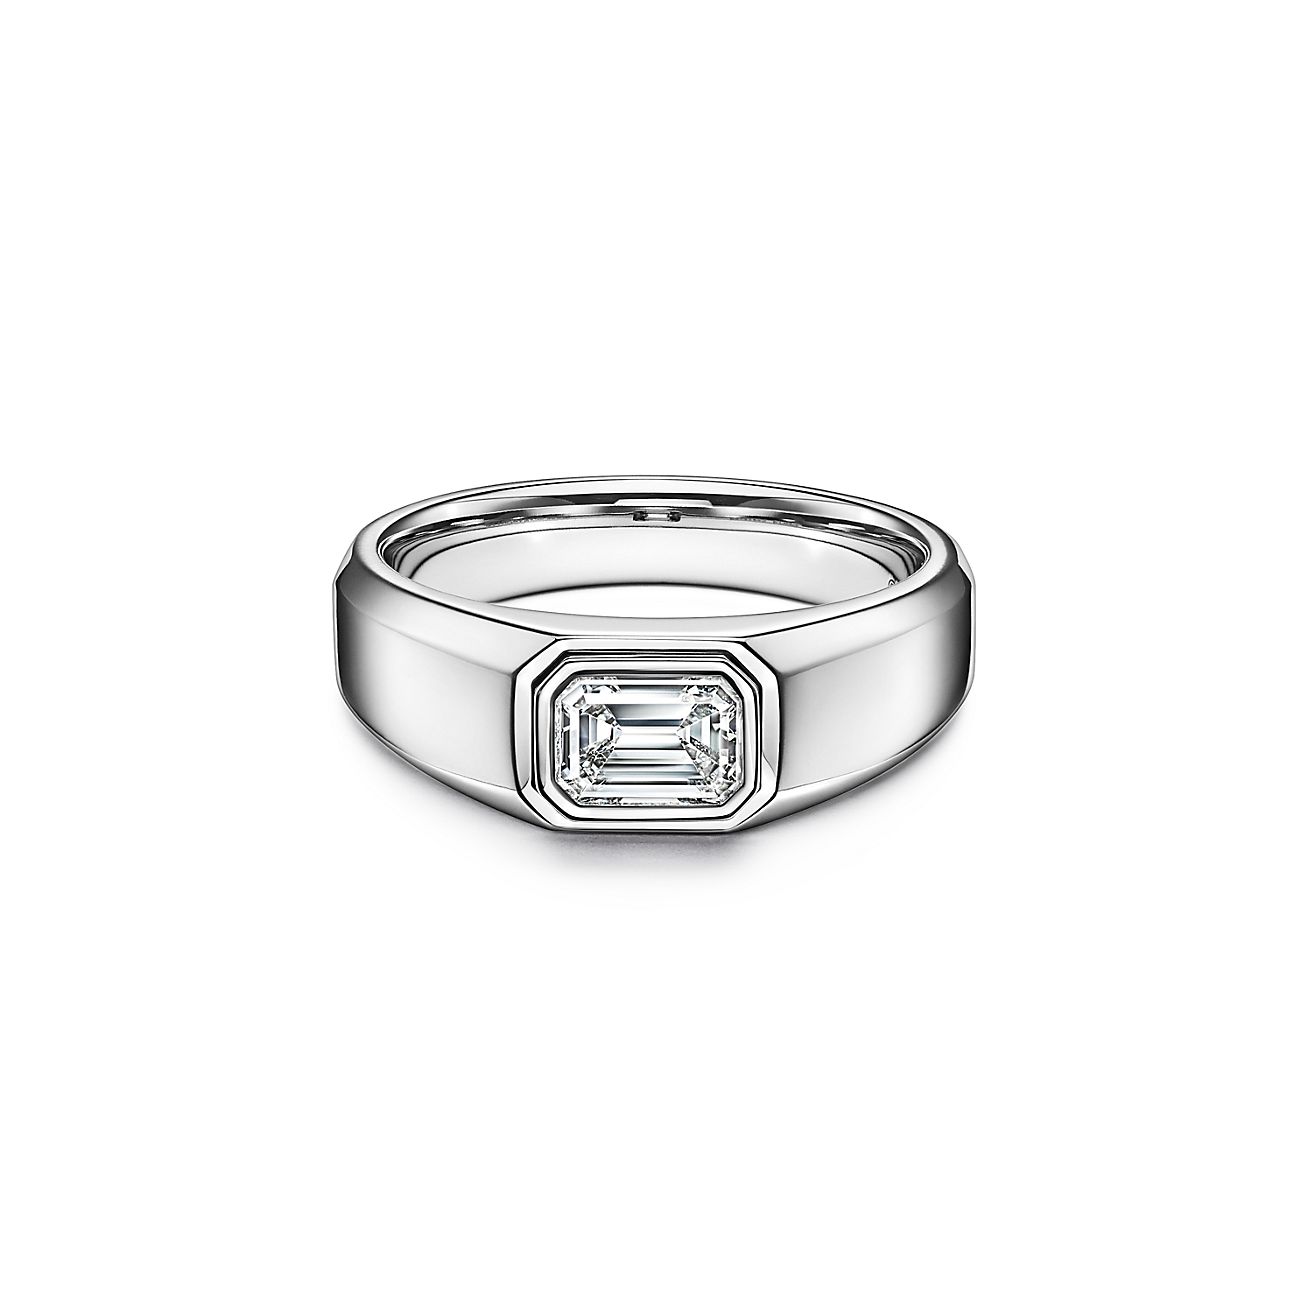 CAOSHI Luxury Wedding Rings For Him With Dazzling Zirconia Modern Trendy Mens  Engagement Jewelry And Exquisite Gift From Marquesechriss, $10.67 |  DHgate.Com